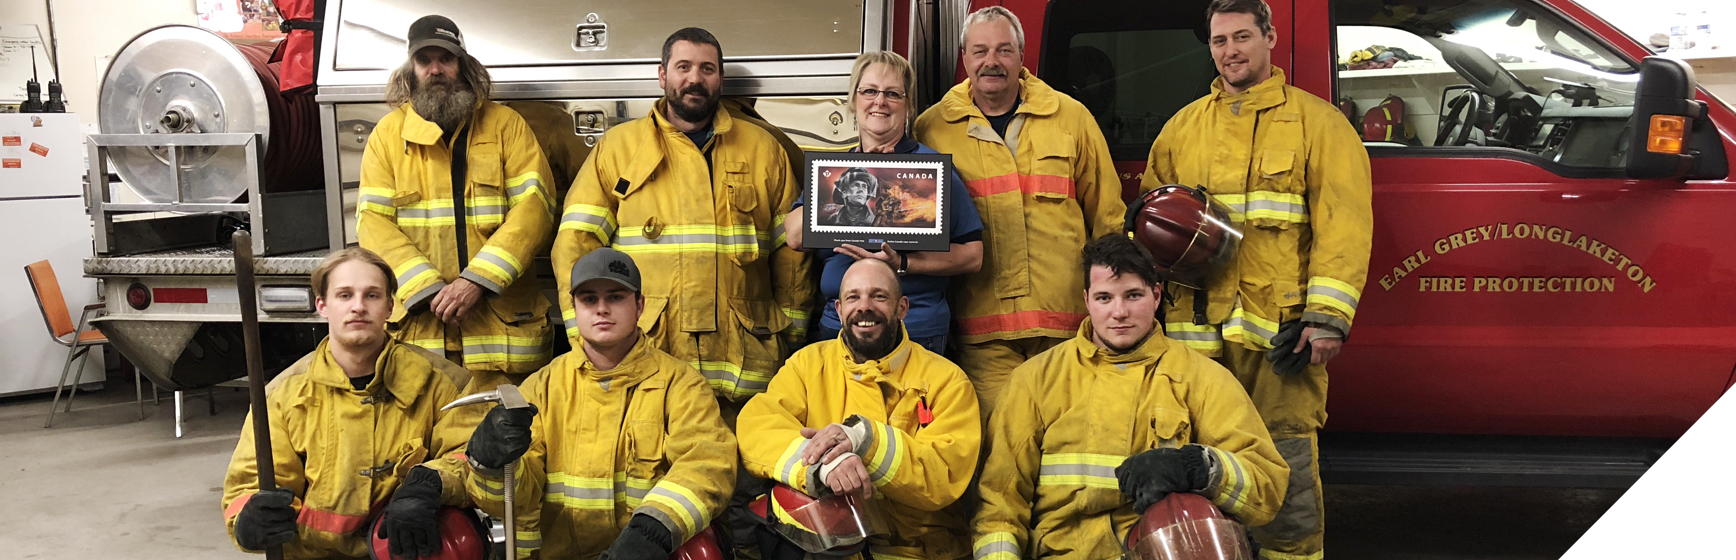 Firefighters in Earl Grey, Sask. receive commemorative plaque of the Emergency Responders stamp honouring firefighters.